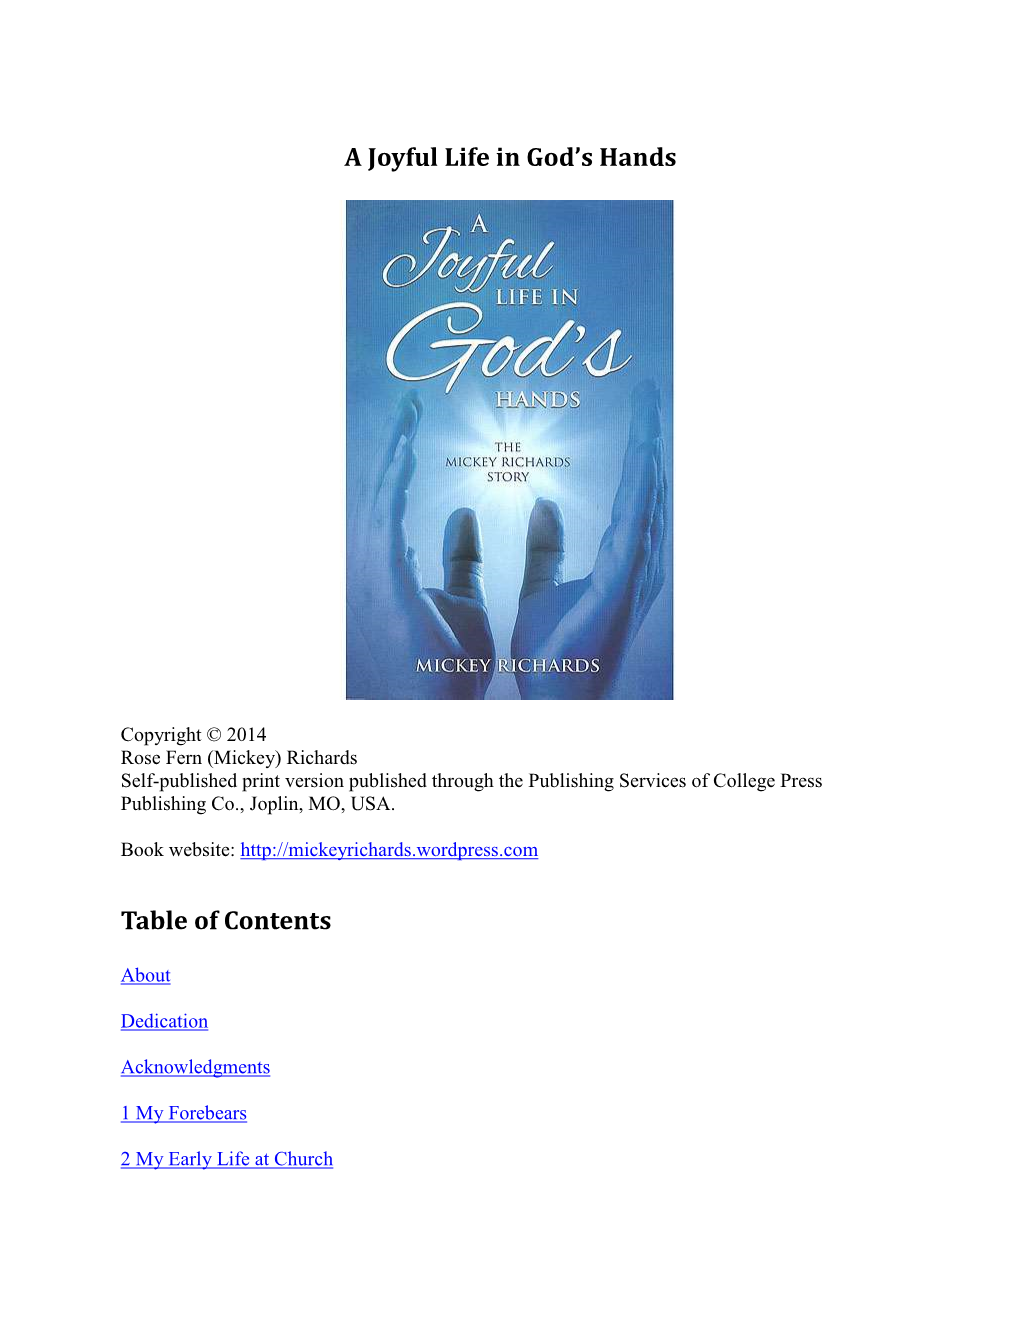 A Joyful Life in God's Hands Table of Contents